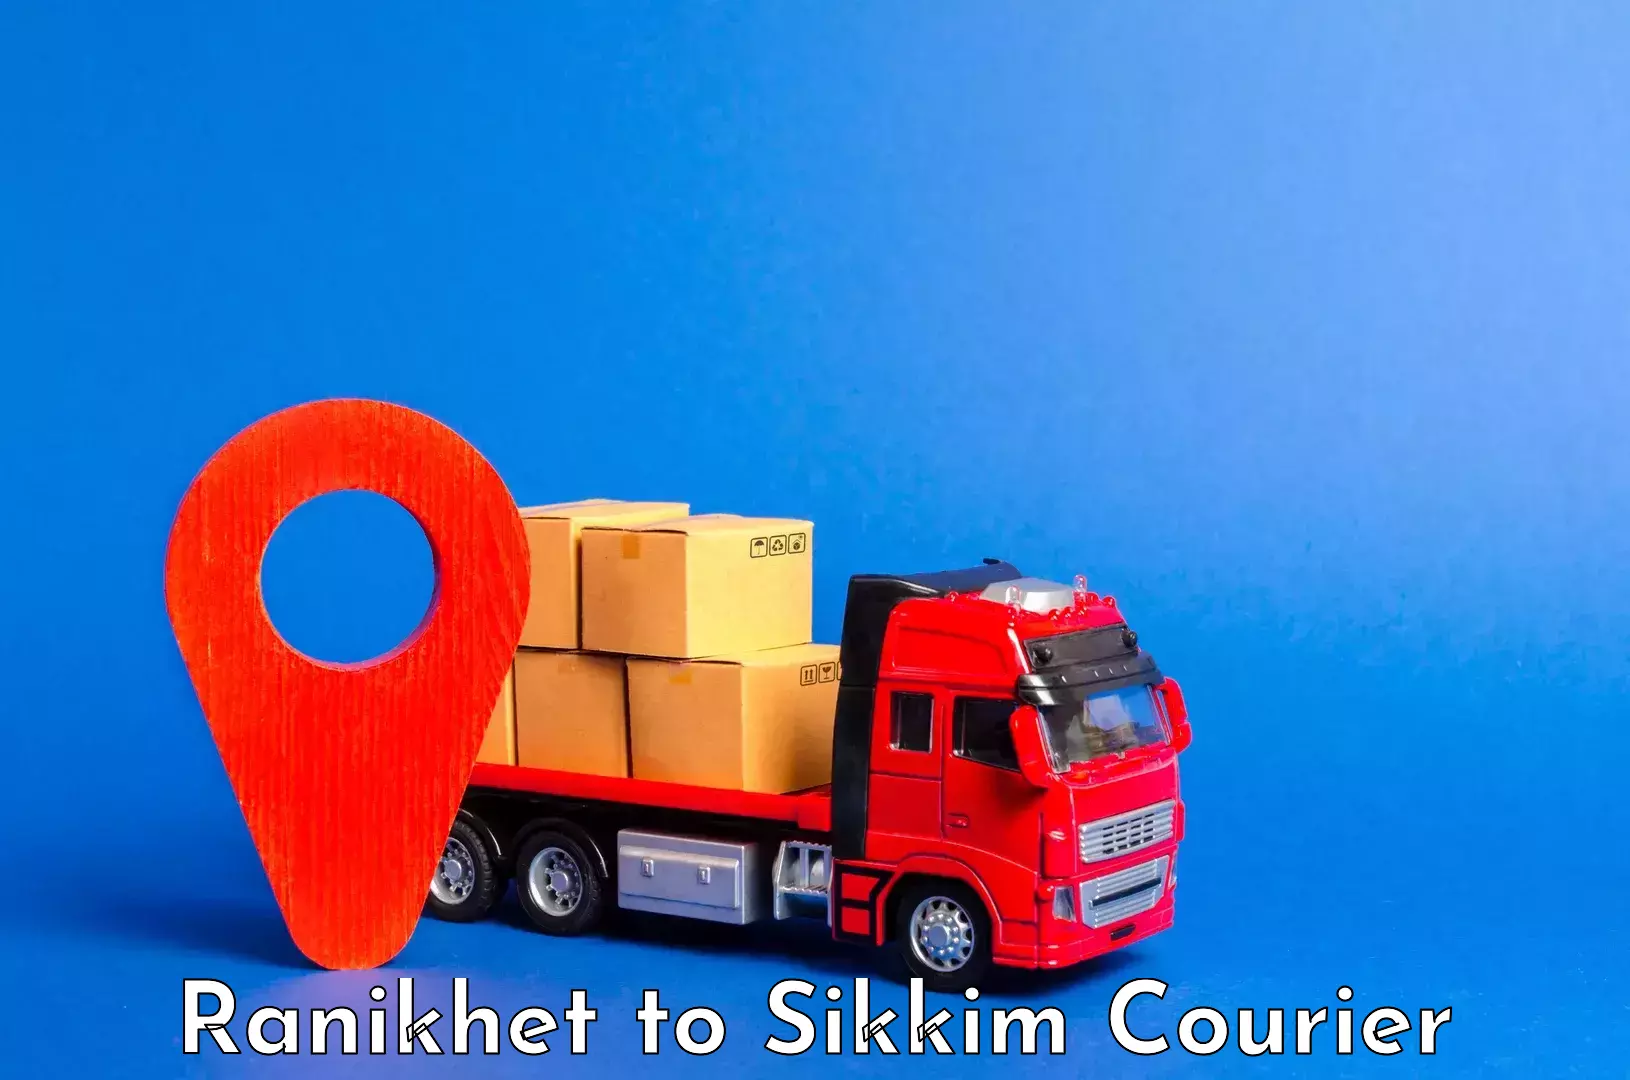 Luggage shipment specialists Ranikhet to Sikkim